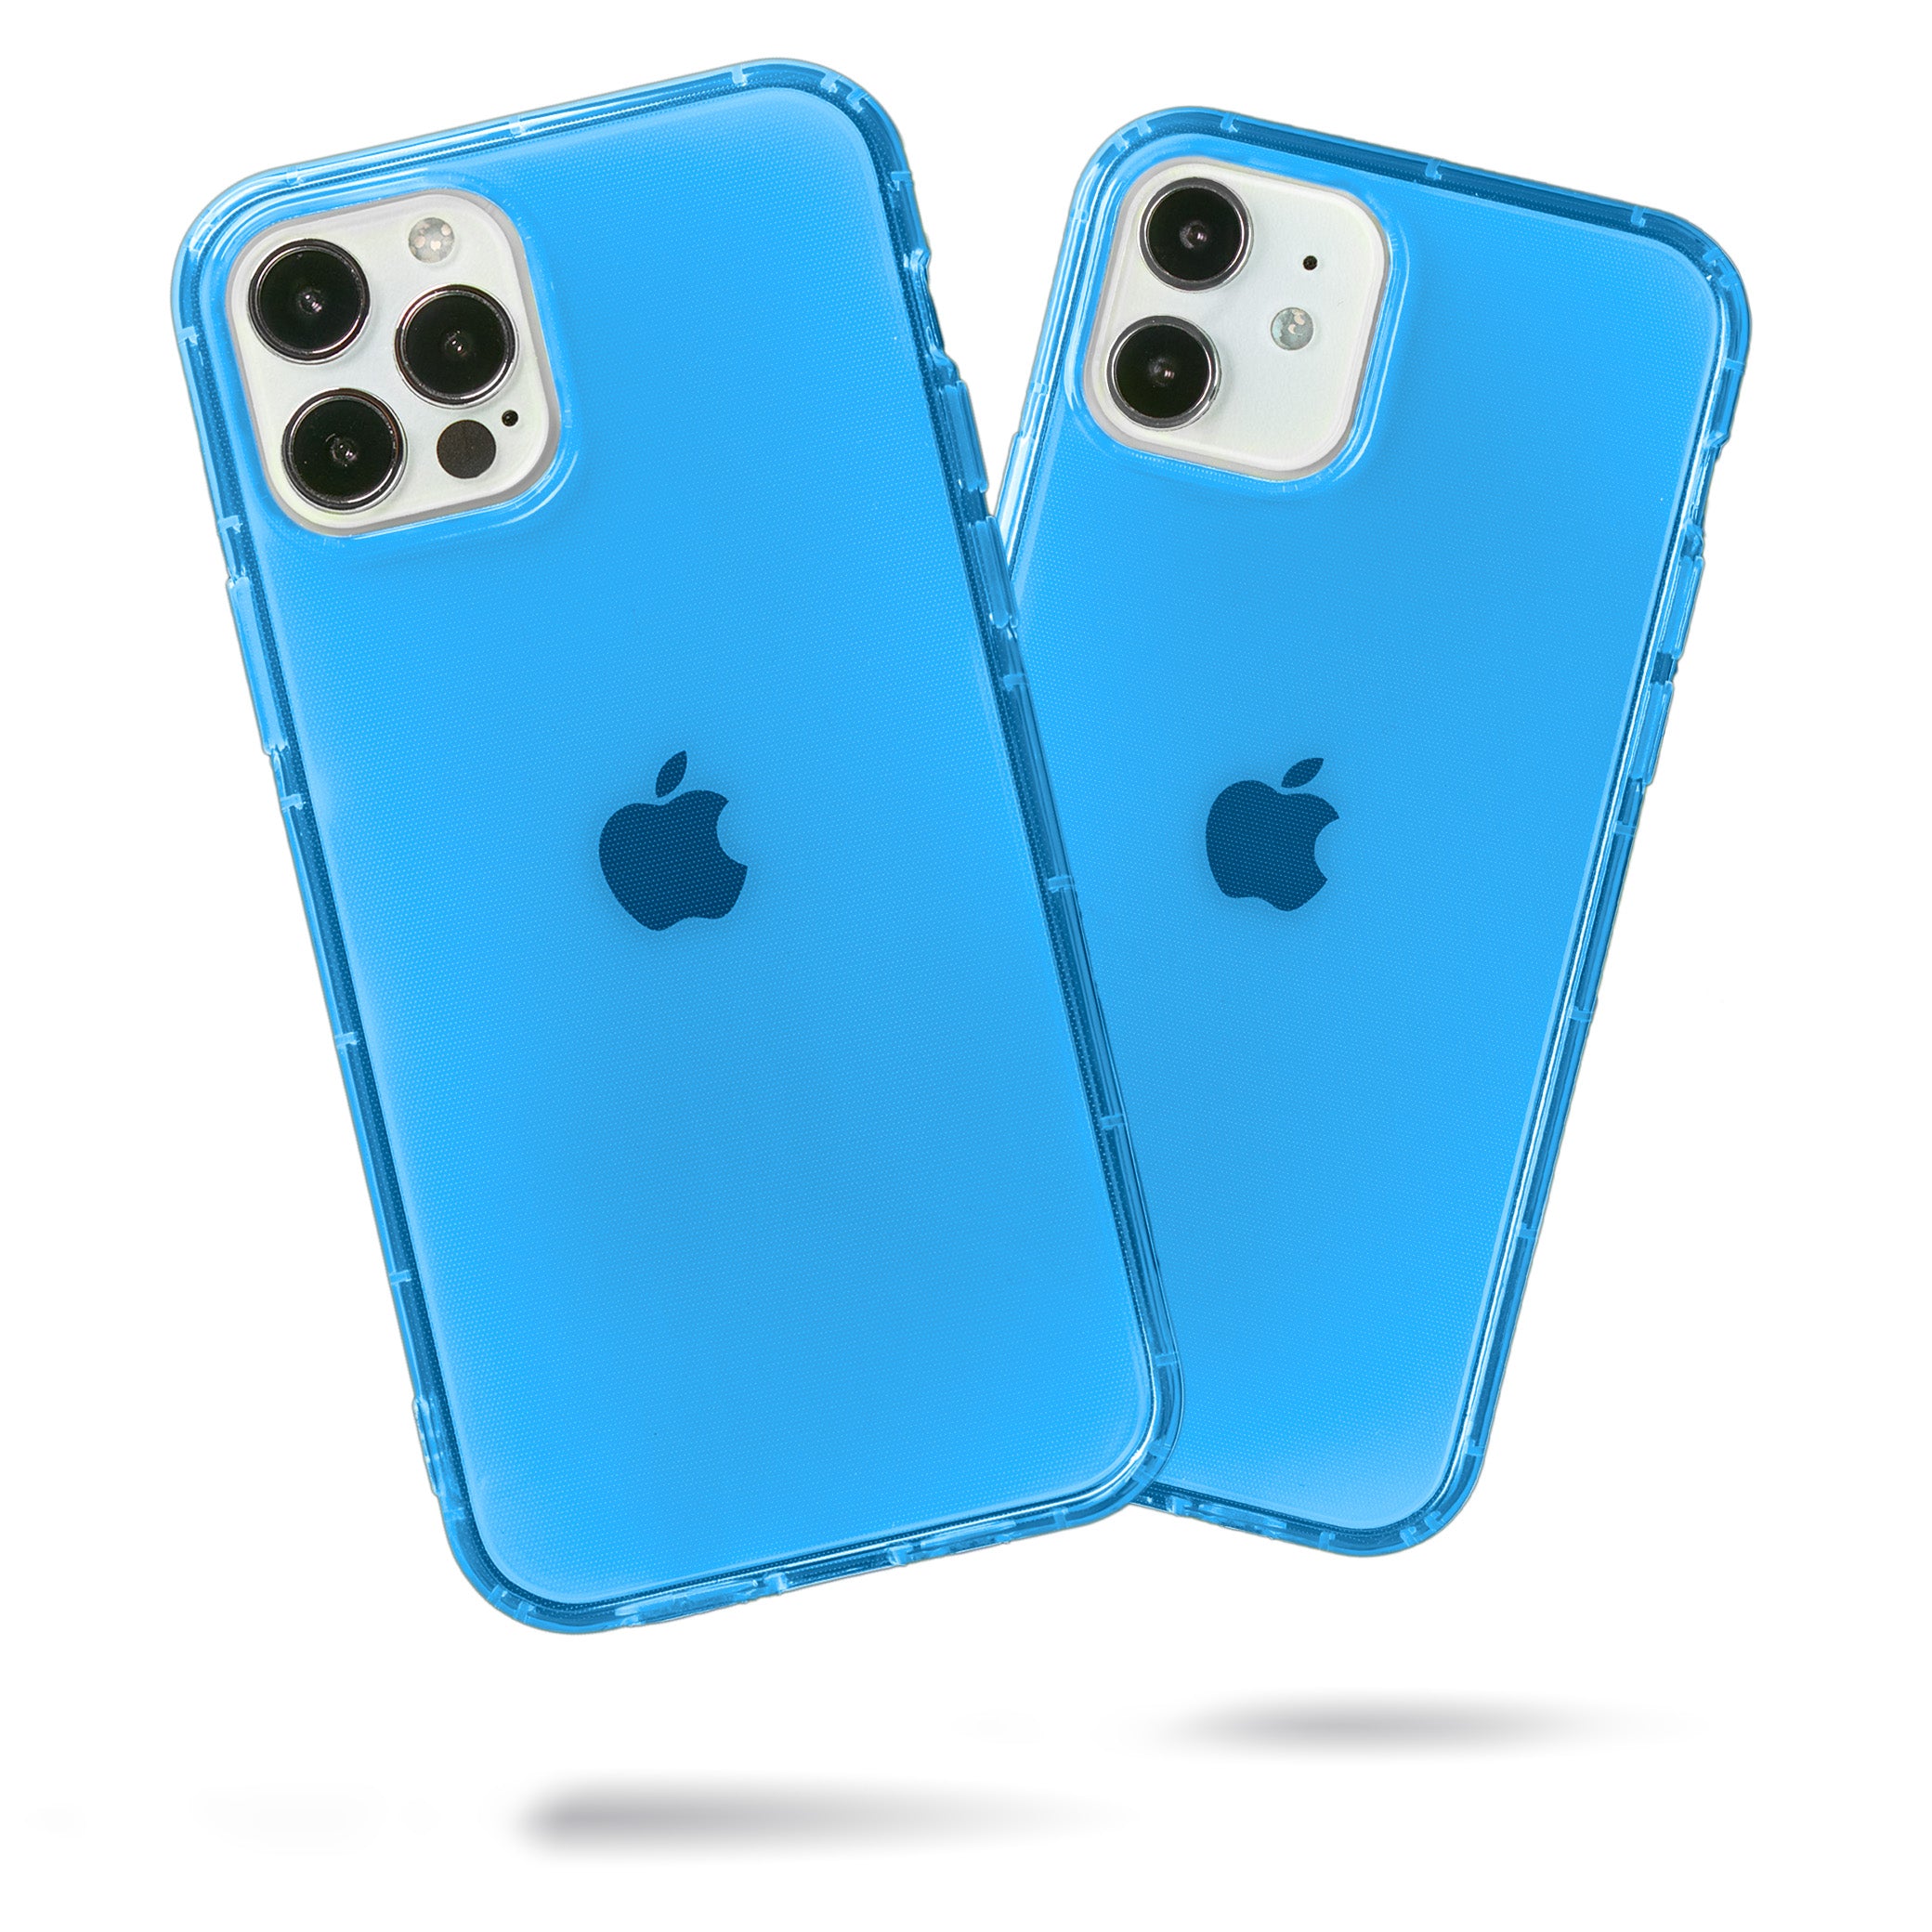 Highlighter Case for iPhone 12 and 12 Pro - Elevated Azure Blue